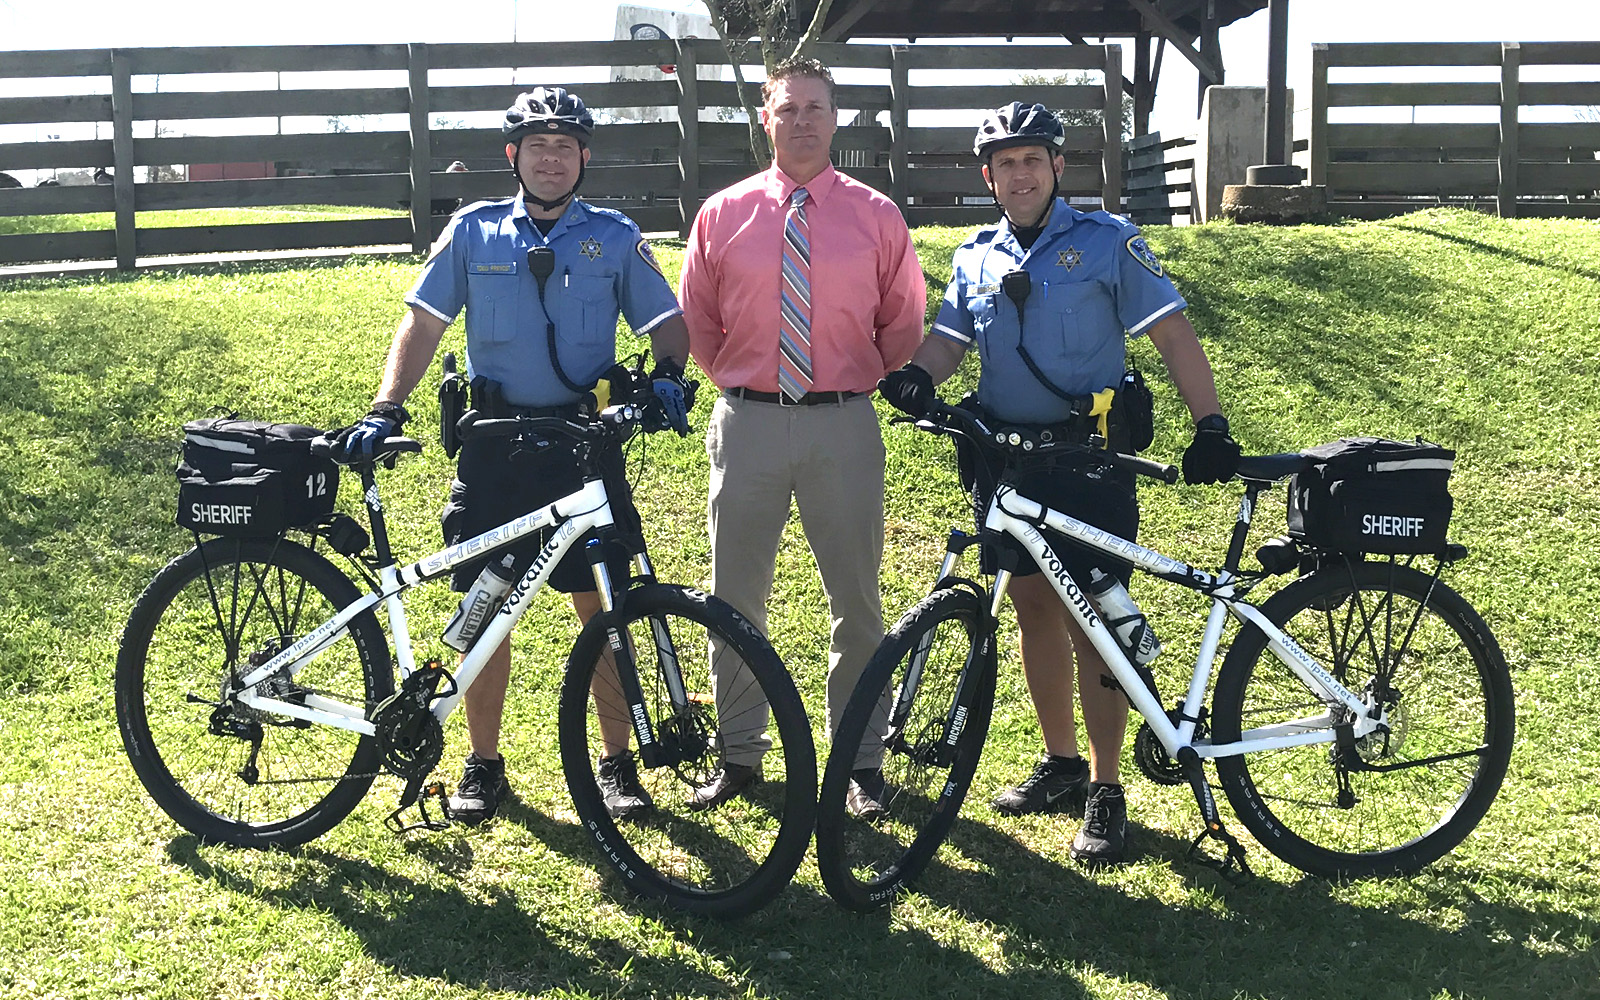 Sergeant Todd Prevost (left) and Deputy Jason Matherne (right) pictured with John Champagne (center) of the Community Crusaders of Lafourche.